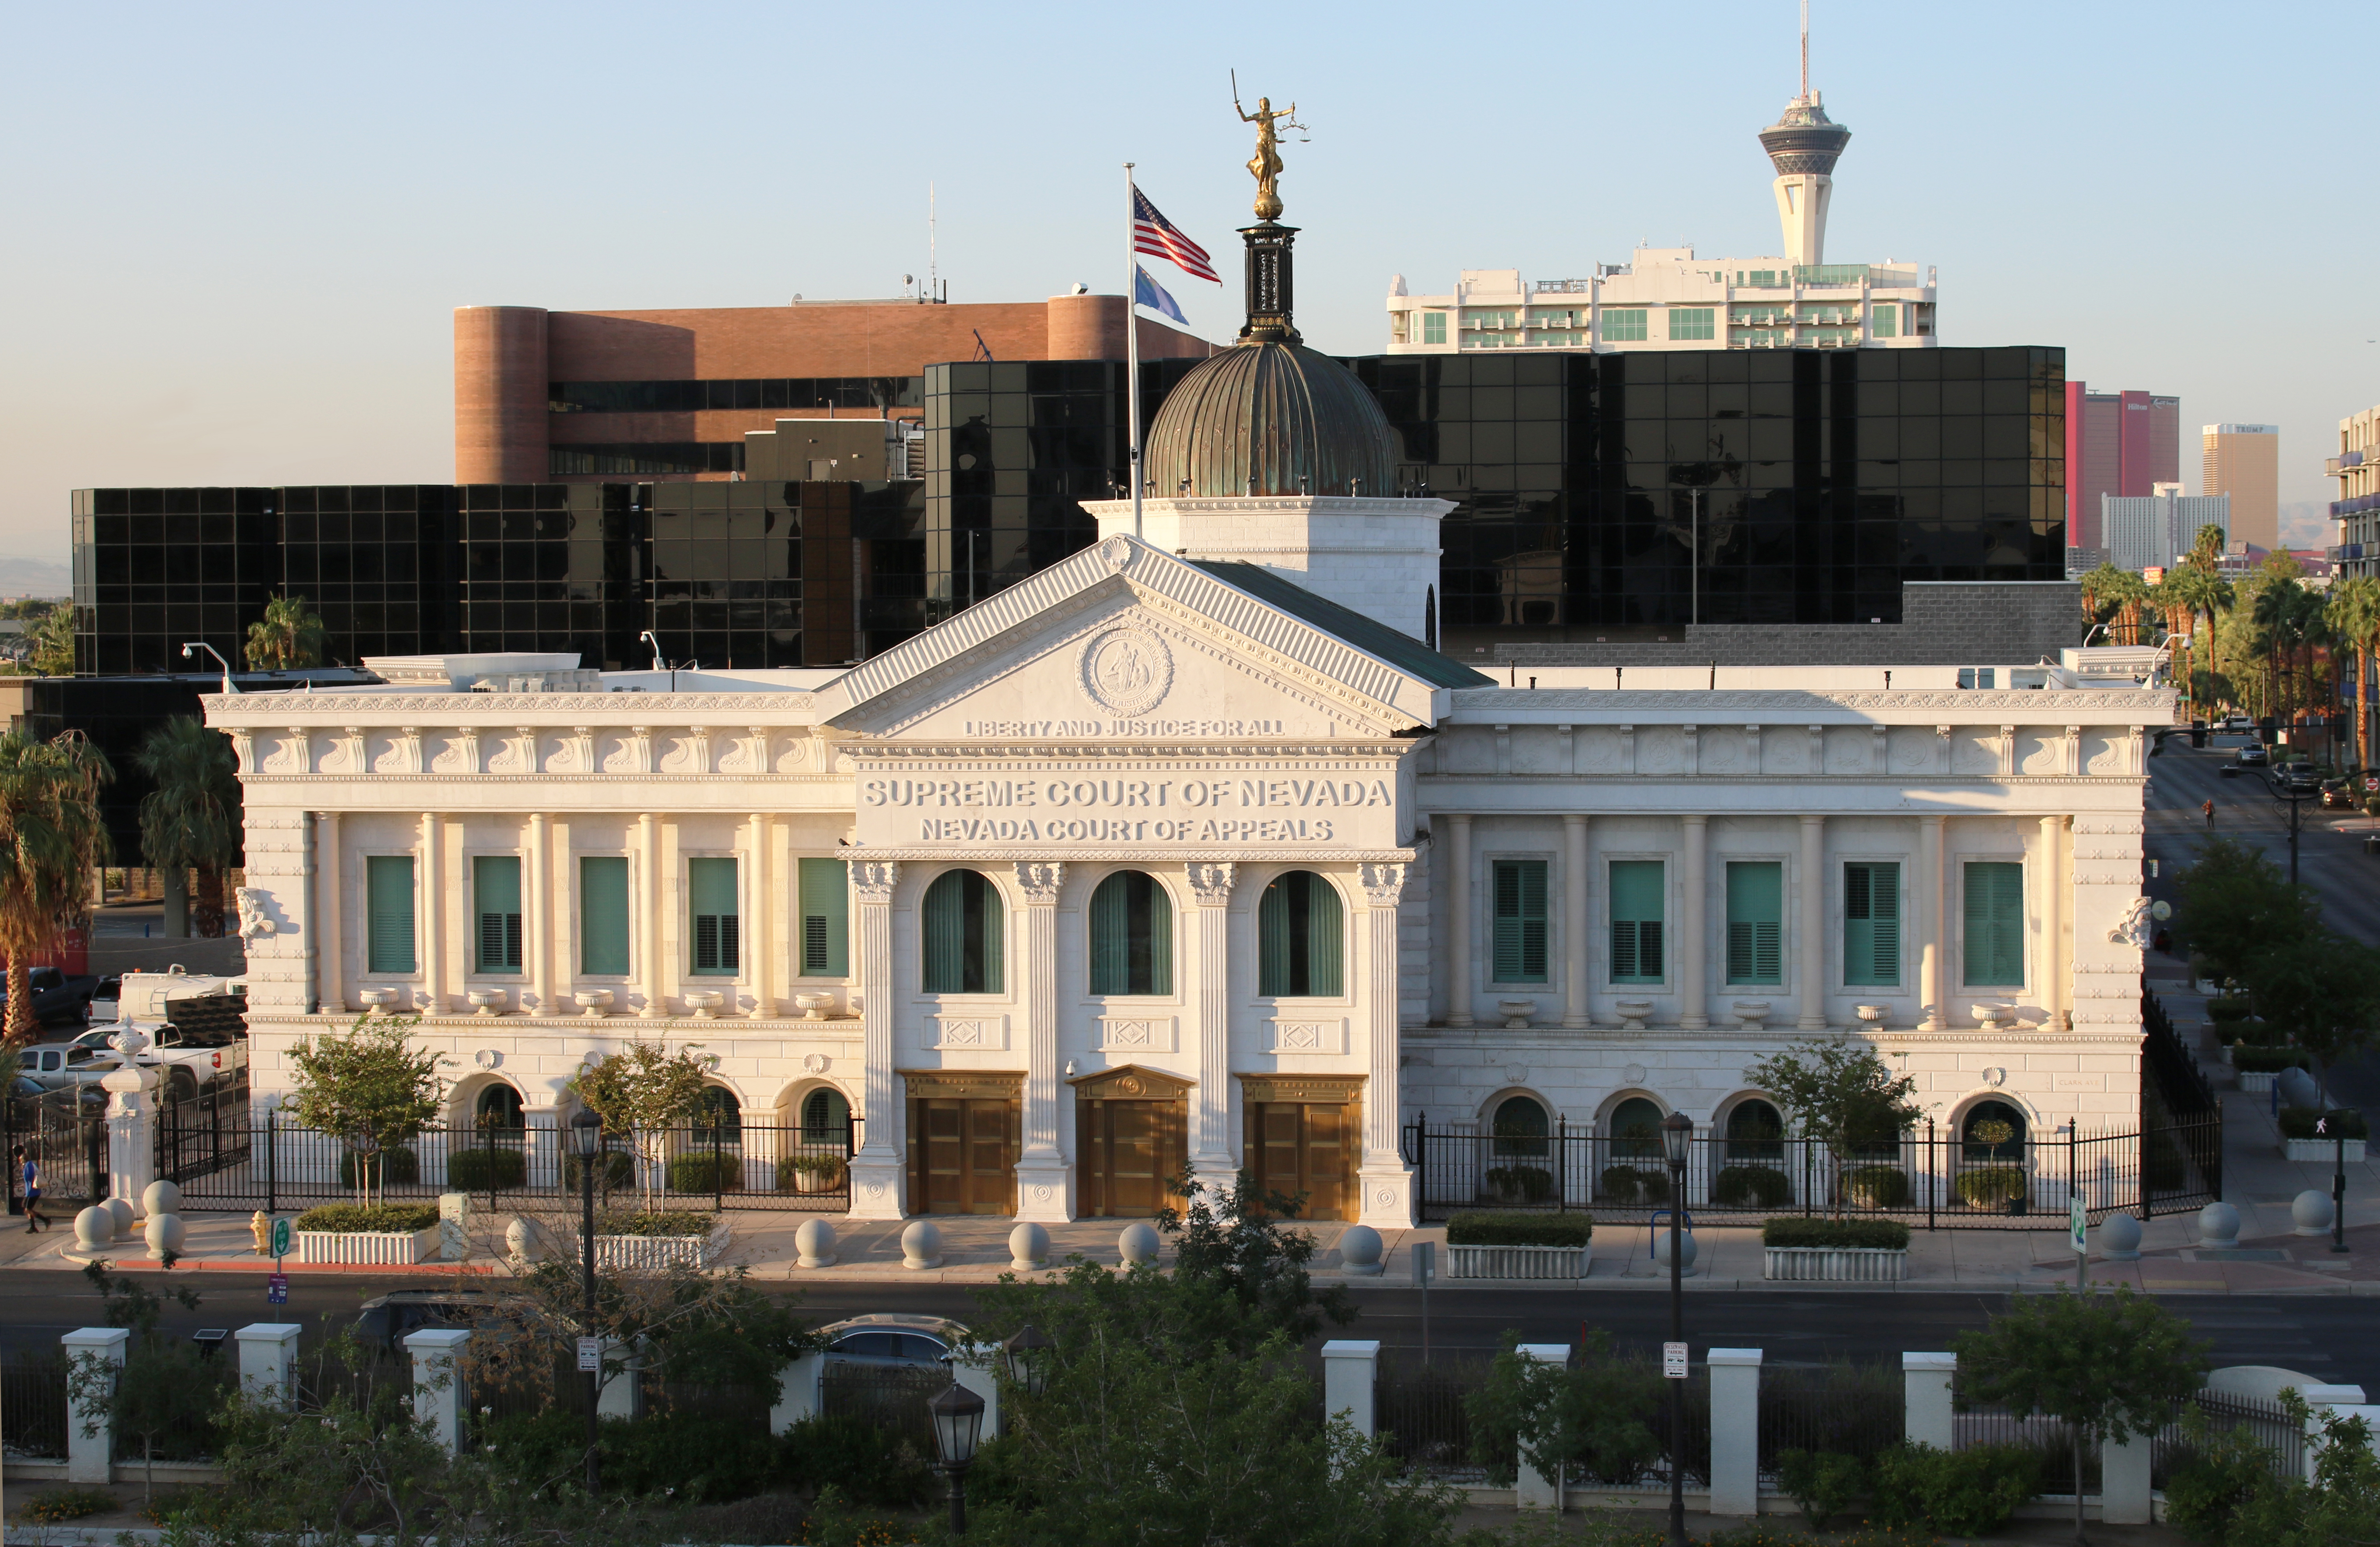 Photo of the Nevada Supreme Court house in Las Vegas. the photo is taken at sunrise and other buildings can bee seen in the background